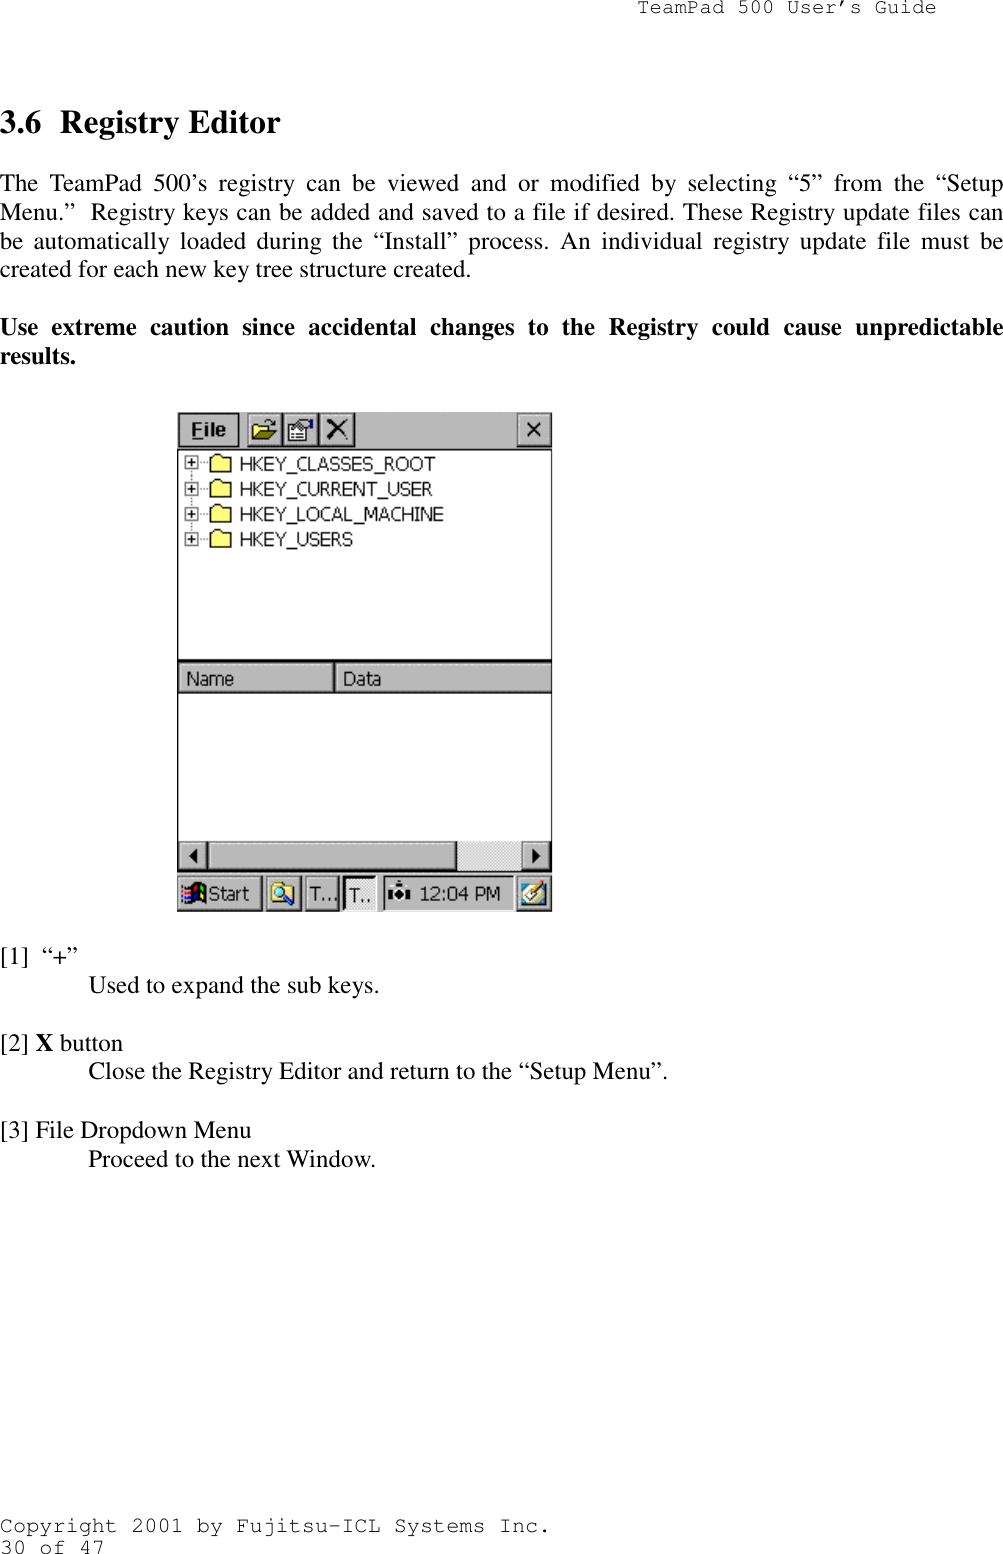                TeamPad 500 User’s GuideCopyright 2001 by Fujitsu-ICL Systems Inc.30 of 473.6 Registry EditorThe TeamPad 500’s registry can be viewed and or modified by selecting “5” from the “SetupMenu.”  Registry keys can be added and saved to a file if desired. These Registry update files canbe automatically loaded during the “Install” process. An individual registry update file must becreated for each new key tree structure created.Use extreme caution since accidental changes to the Registry could cause unpredictableresults.[1]  “+” Used to expand the sub keys.[2] X buttonClose the Registry Editor and return to the “Setup Menu”.[3] File Dropdown MenuProceed to the next Window.